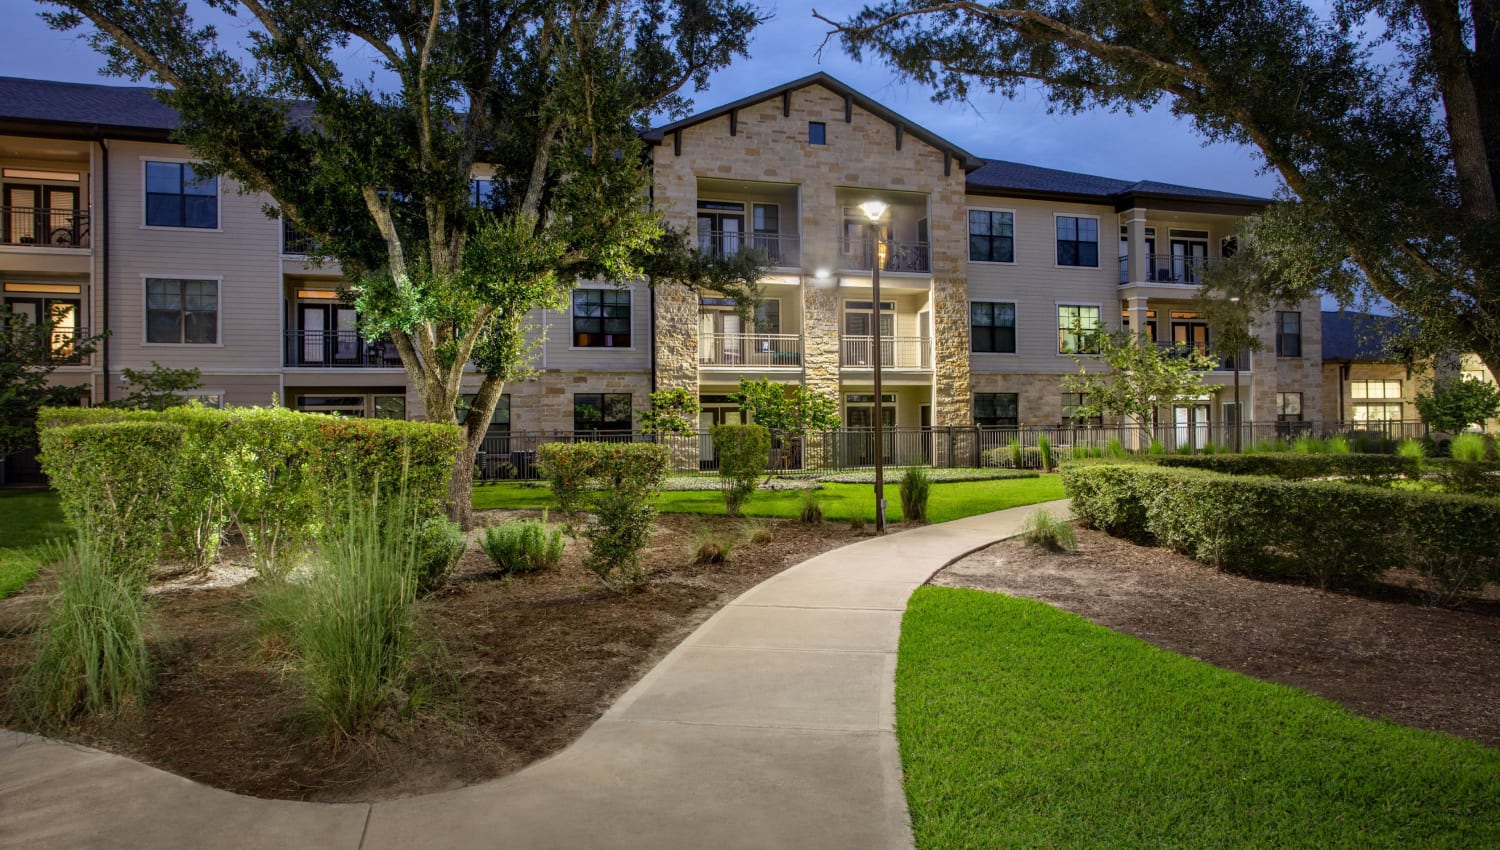 Exterior view of building and freshly cut landscape at Olympus Falcon Landing in Katy, Texas